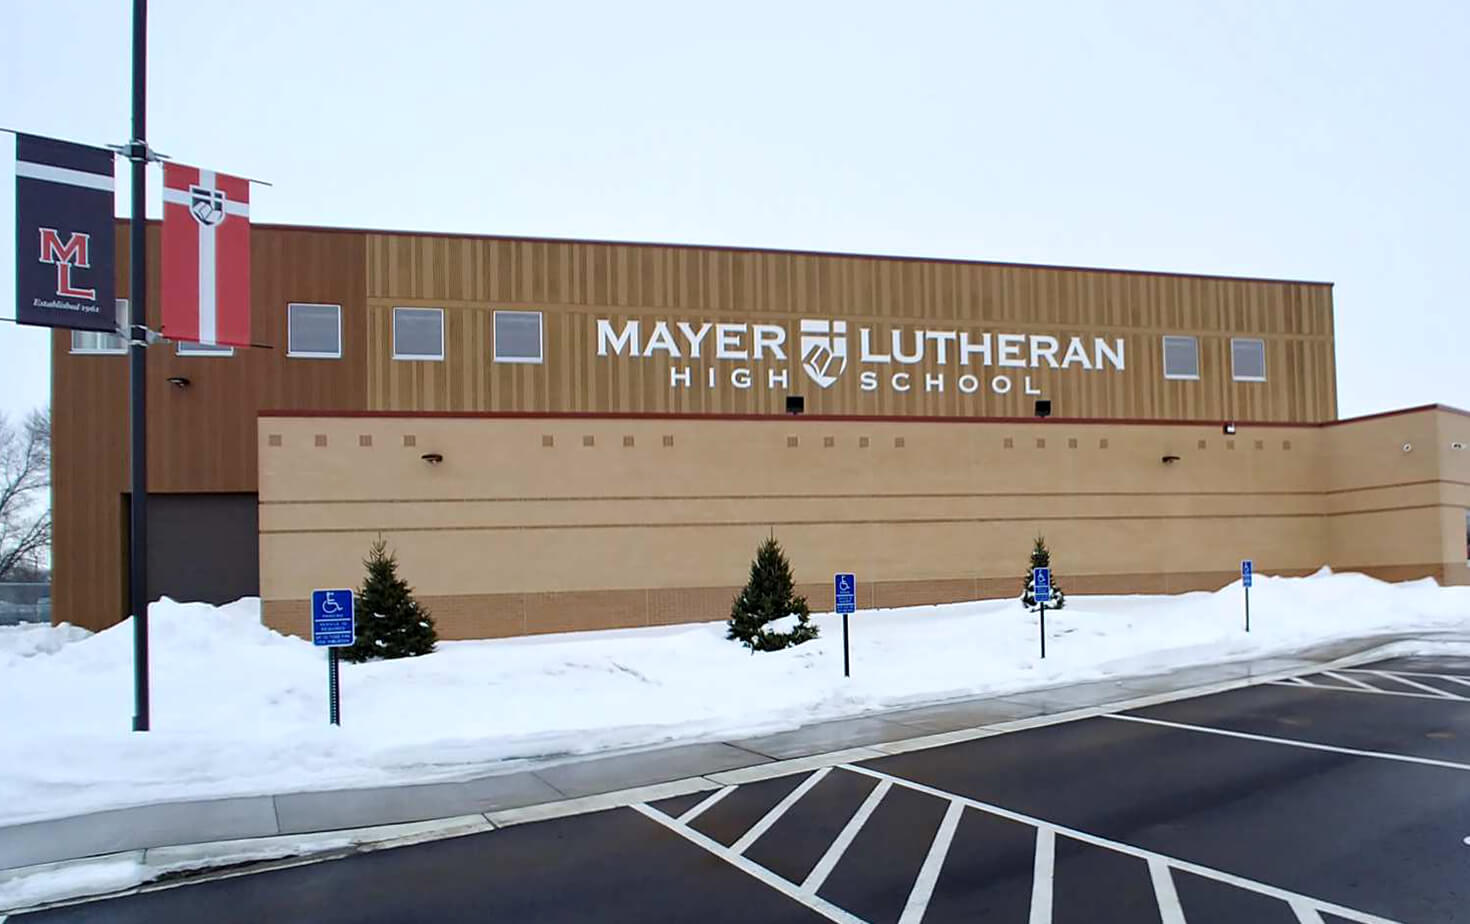 Mayer Lutheran High School Dimensional Letters on Building